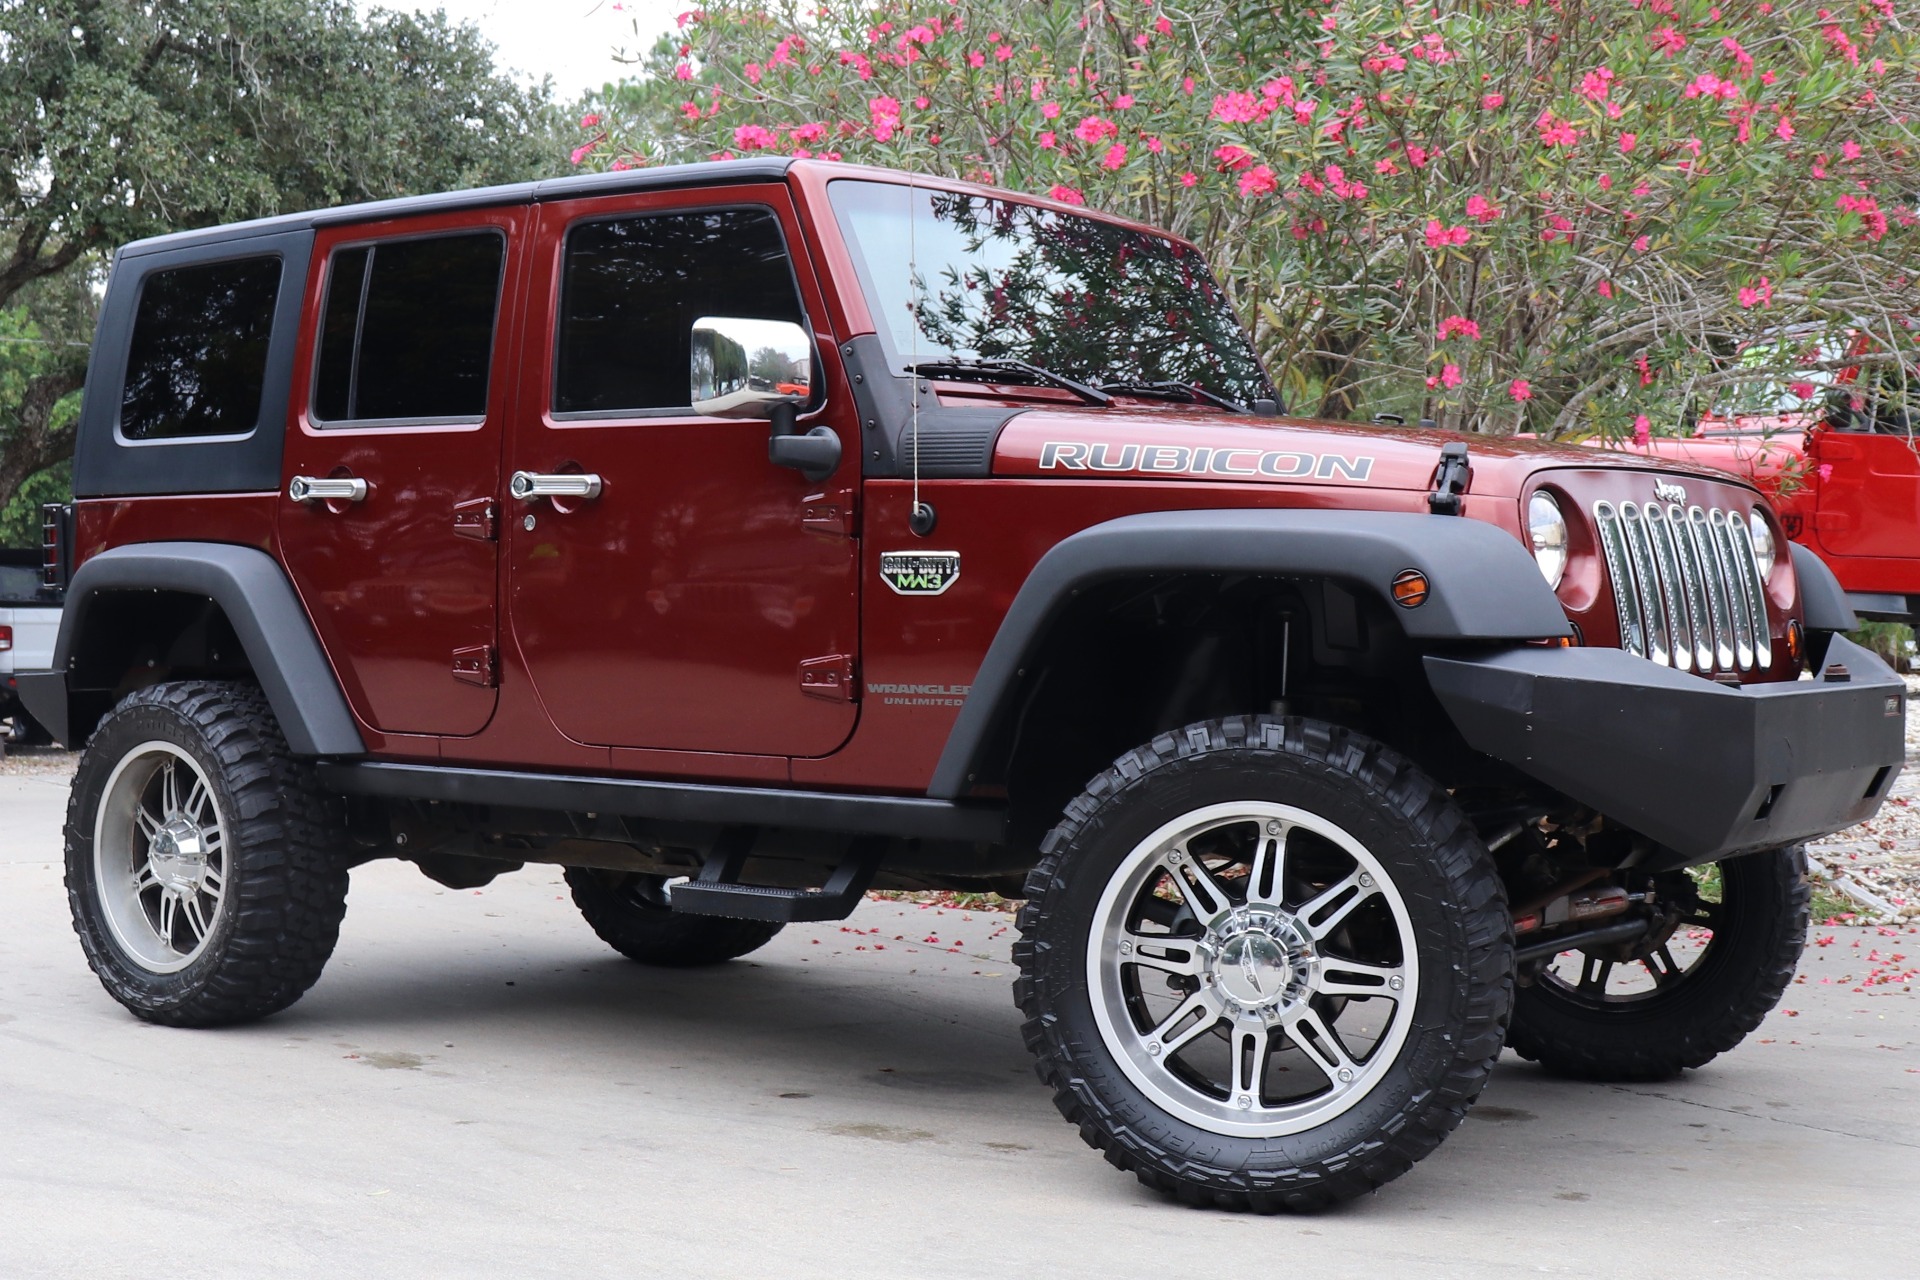 Used 2008 Jeep Wrangler Unlimited Rubicon For Sale ($18,995) | Select Jeeps  Inc. Stock #514572